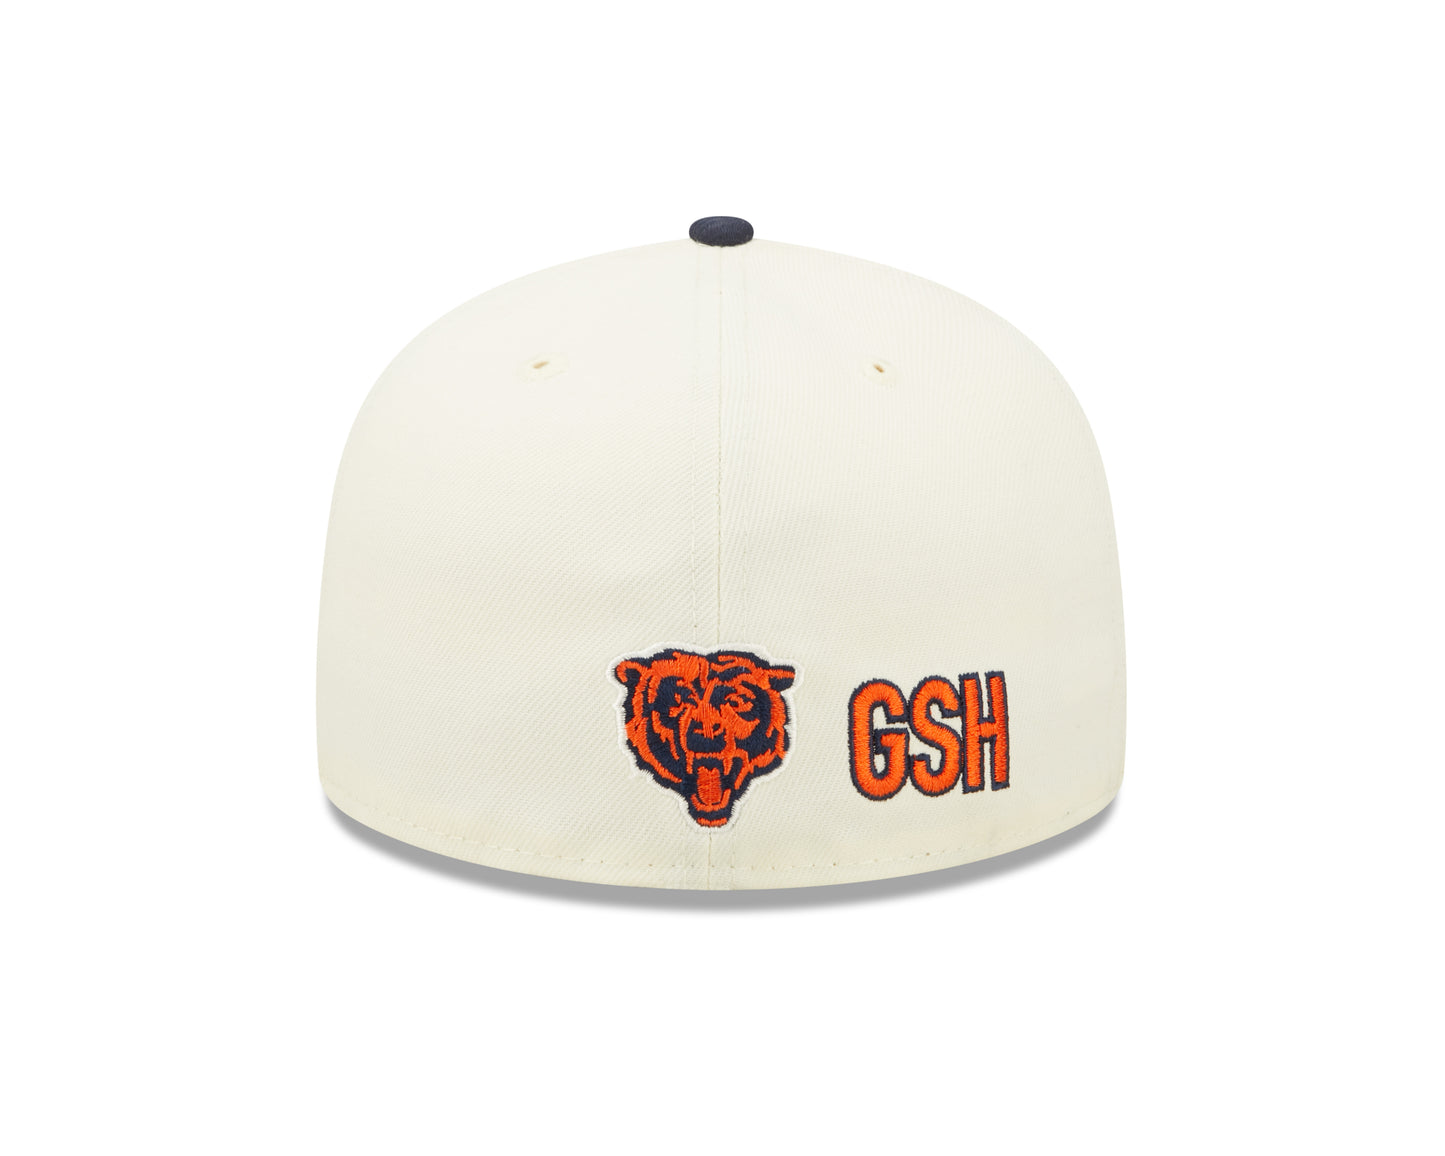 Chicago Bears Mascot Logo 2 Tone Cream/Navy 2022 Sideline New Era 59FIFTY Fitted Hat